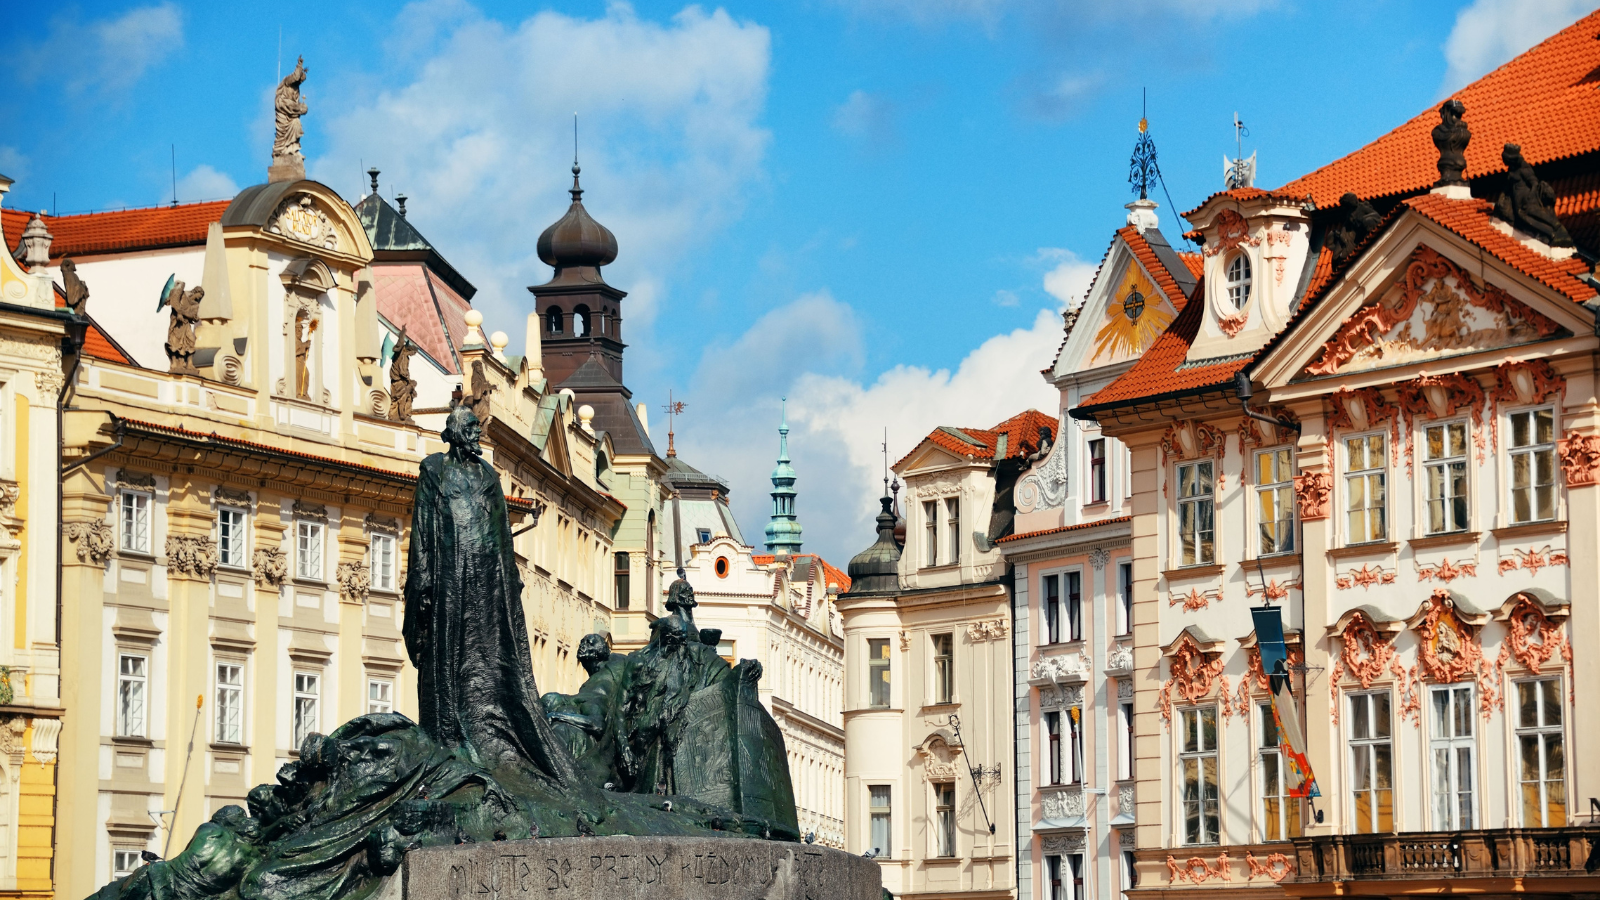 Third option in the list of 10 options to see in Prague in 1 day - Old Town Square (Staroměstské náměstí)